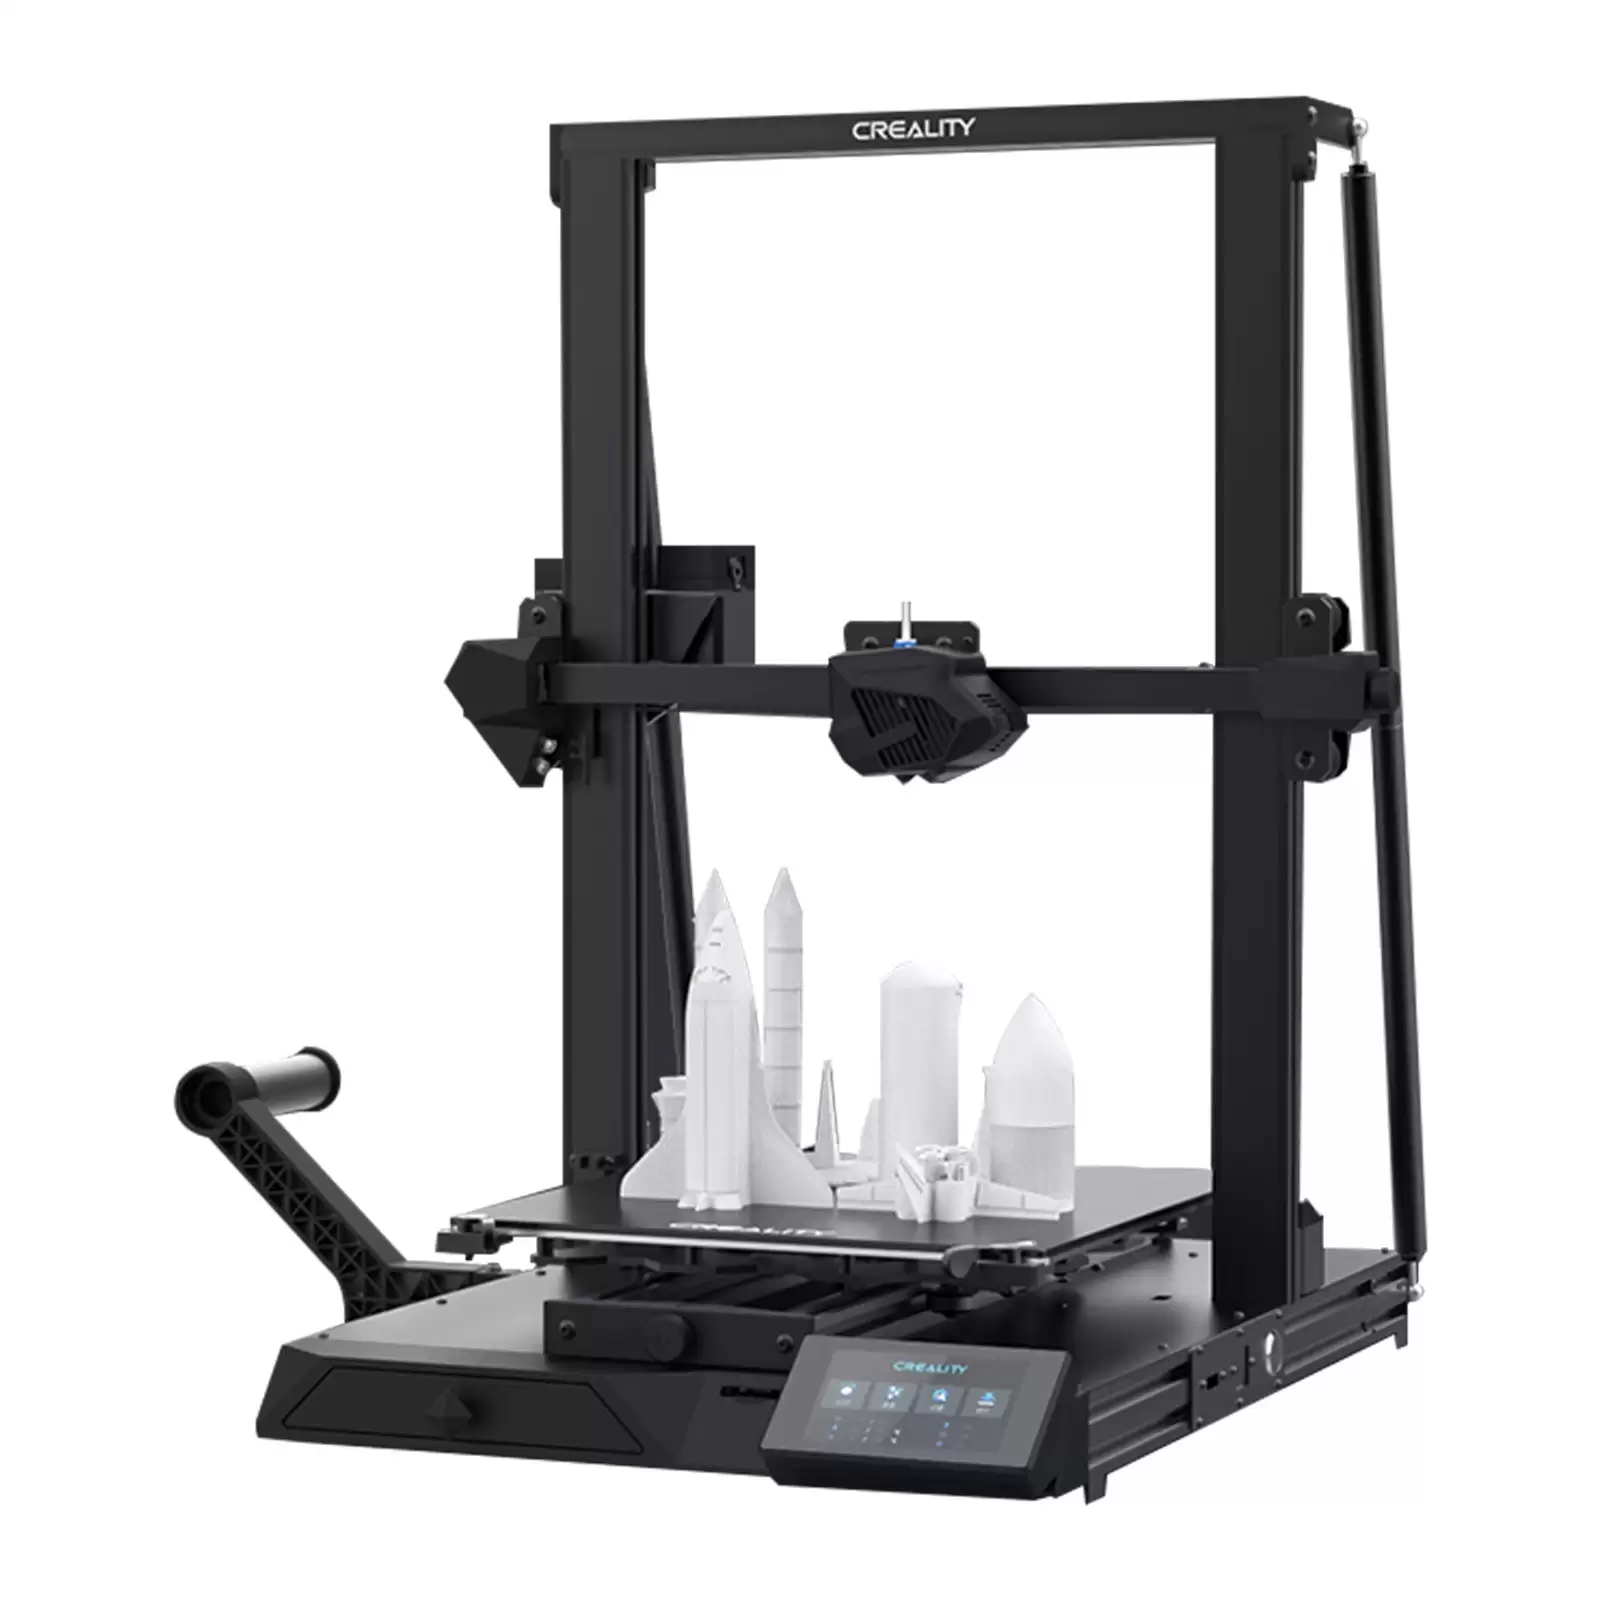 Get Extra $90 Discount On Original Creality Cr-10 Smart High Precision 3d Printer, $389 (Inclusive Of Vat) At Tomtop